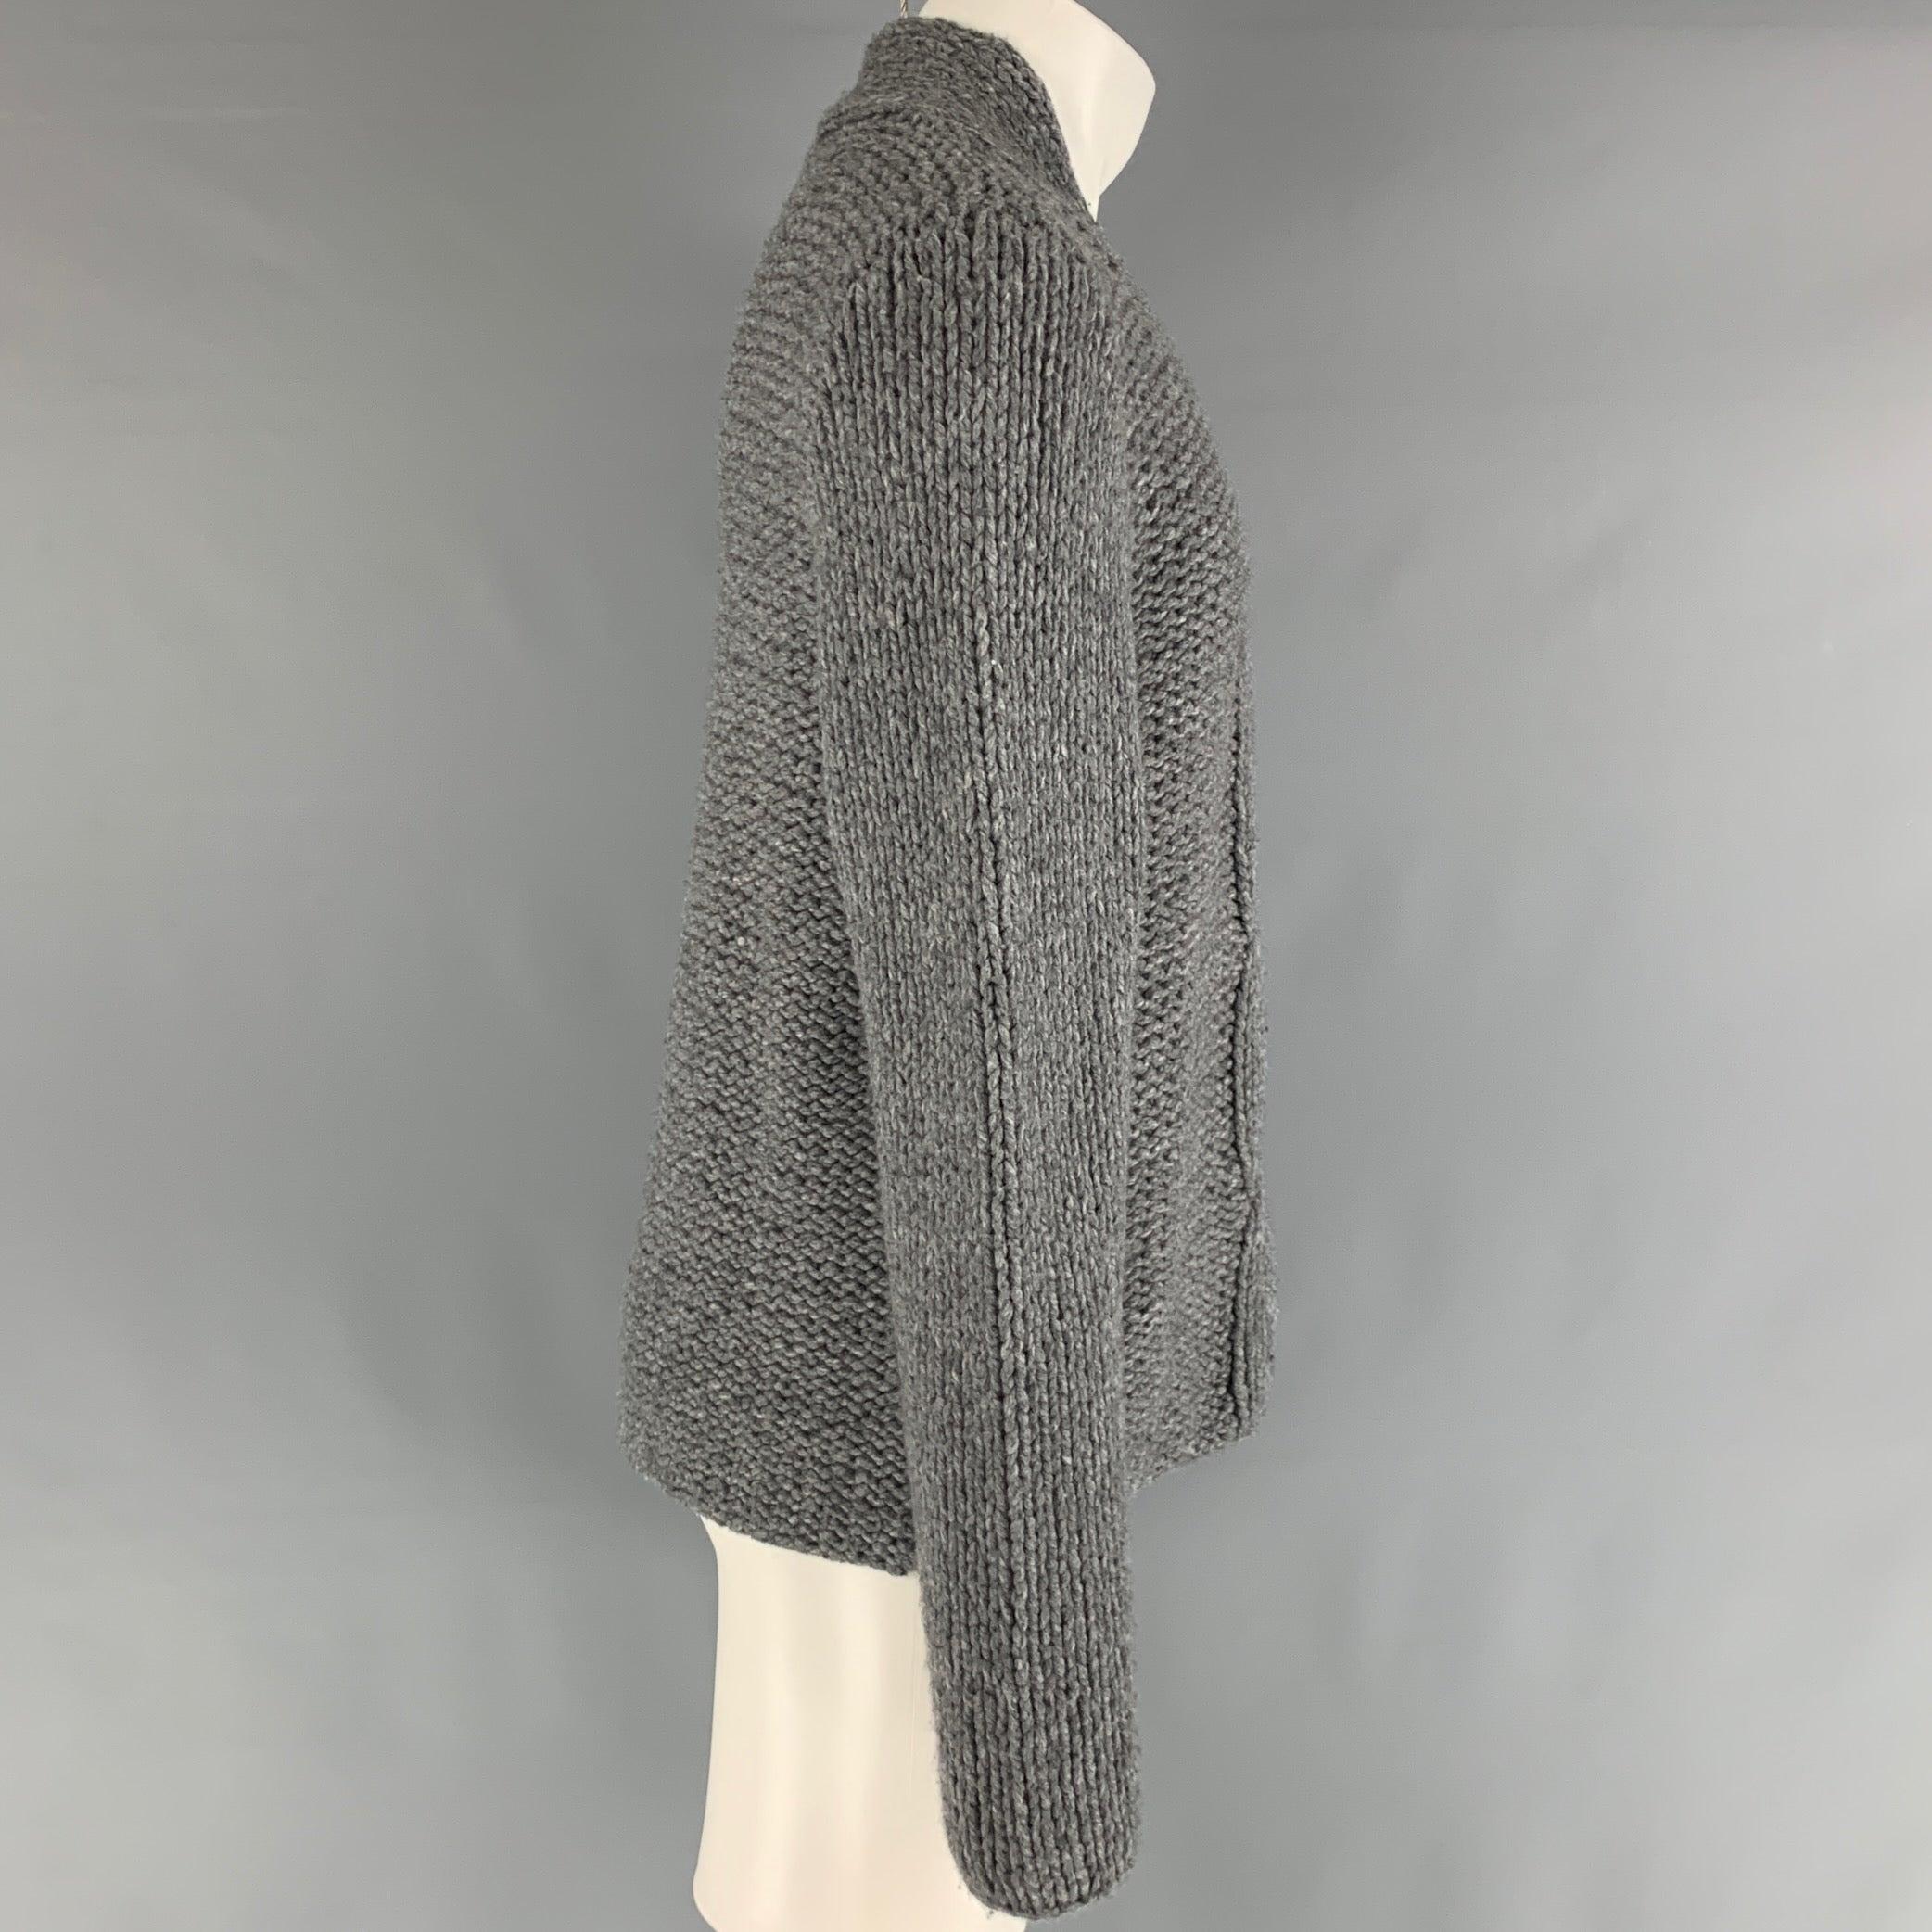 ANN DEMEULEMEESTER Size M Grey Virgin Wool  Cashmere Chunky Knit Sweater In Excellent Condition For Sale In San Francisco, CA